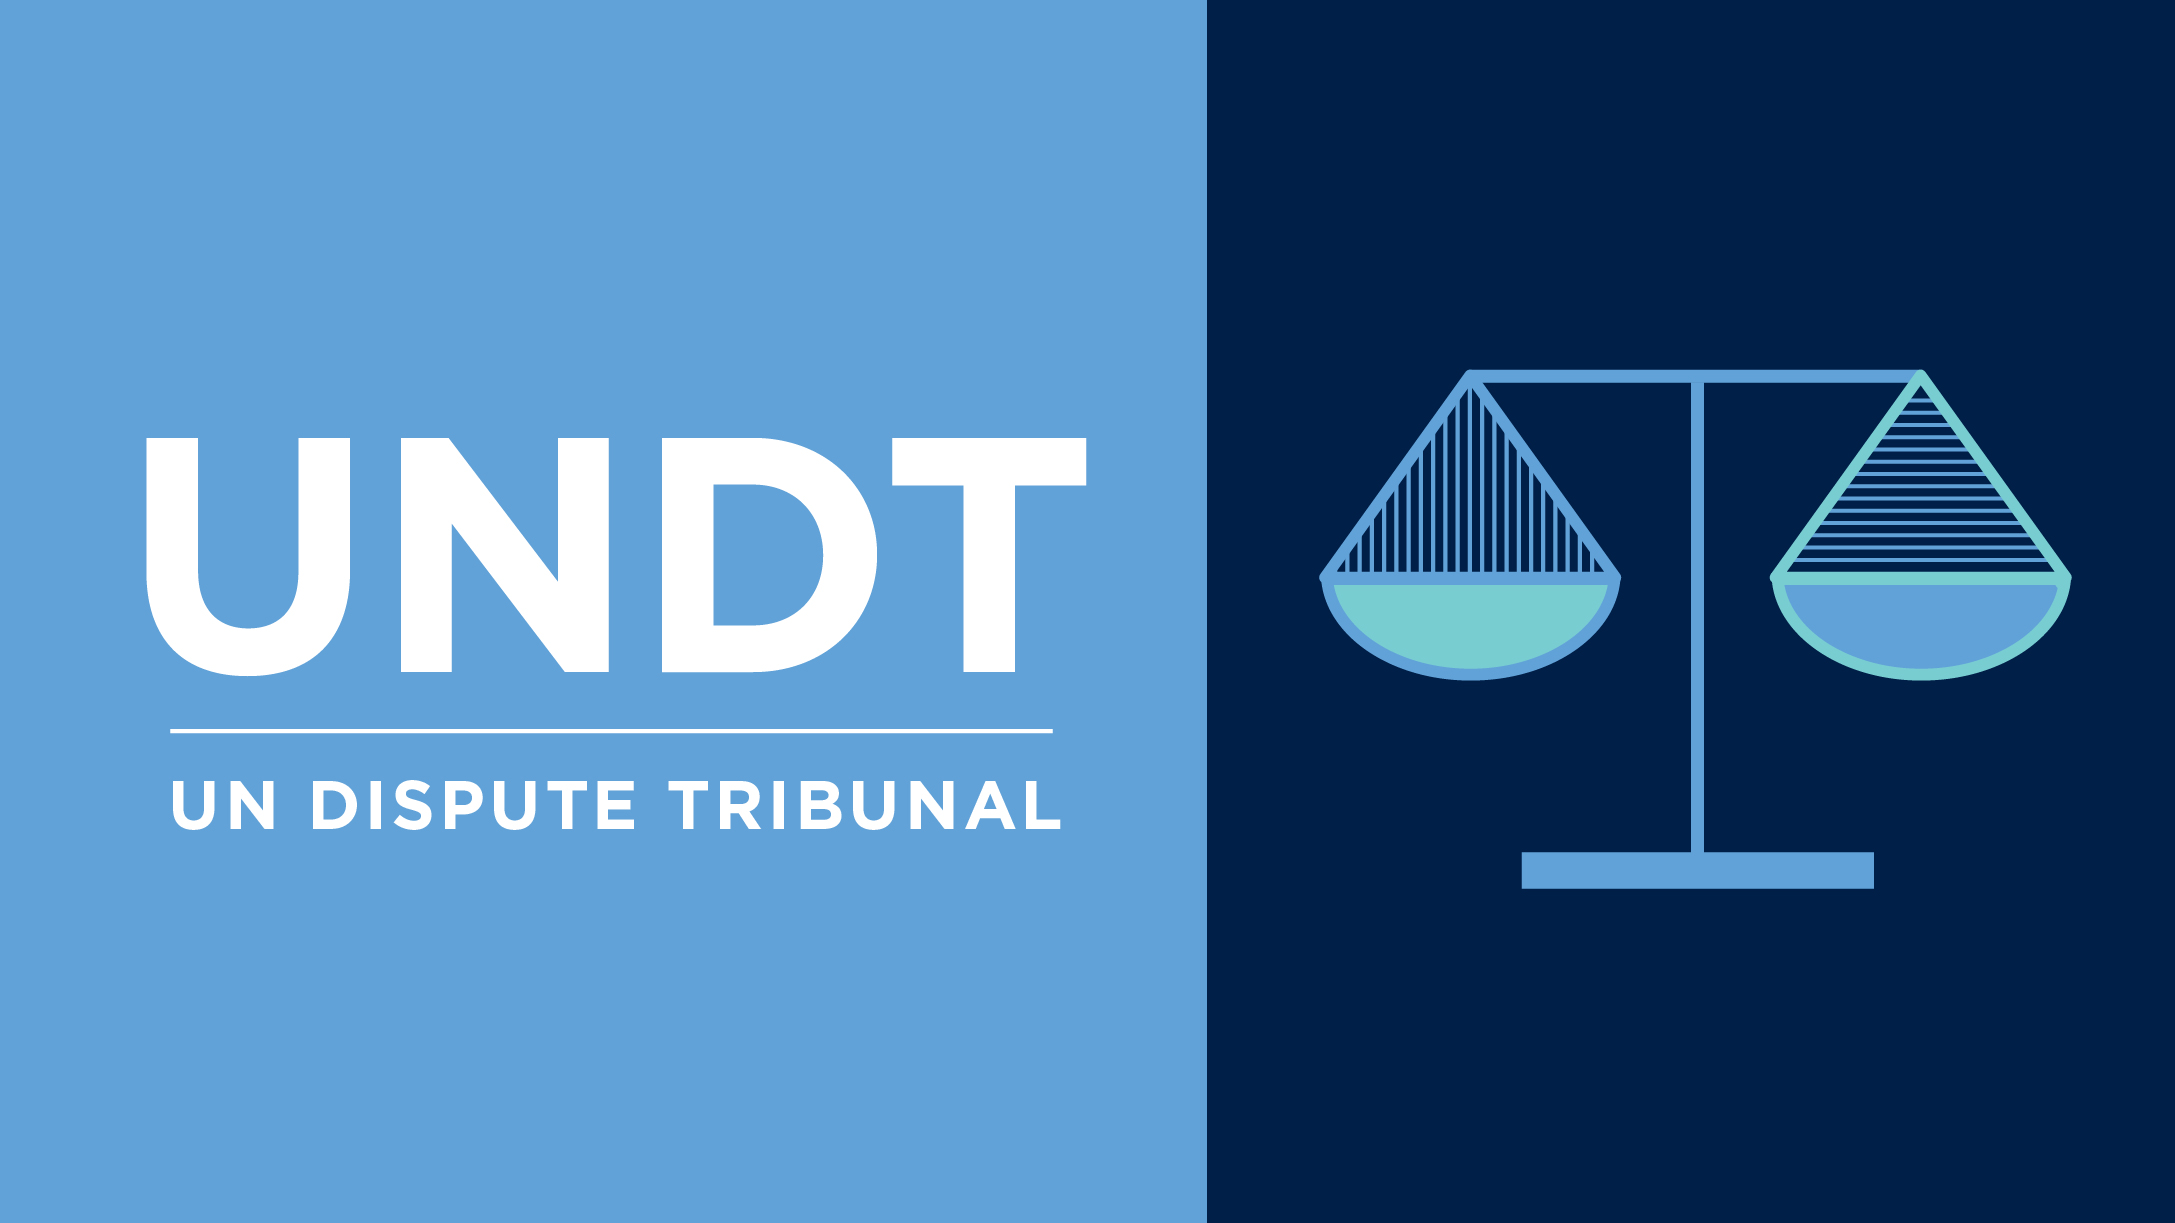 Graphic of illustration of scales of justice with text that reads UNDT - UN Dispute Tribunal